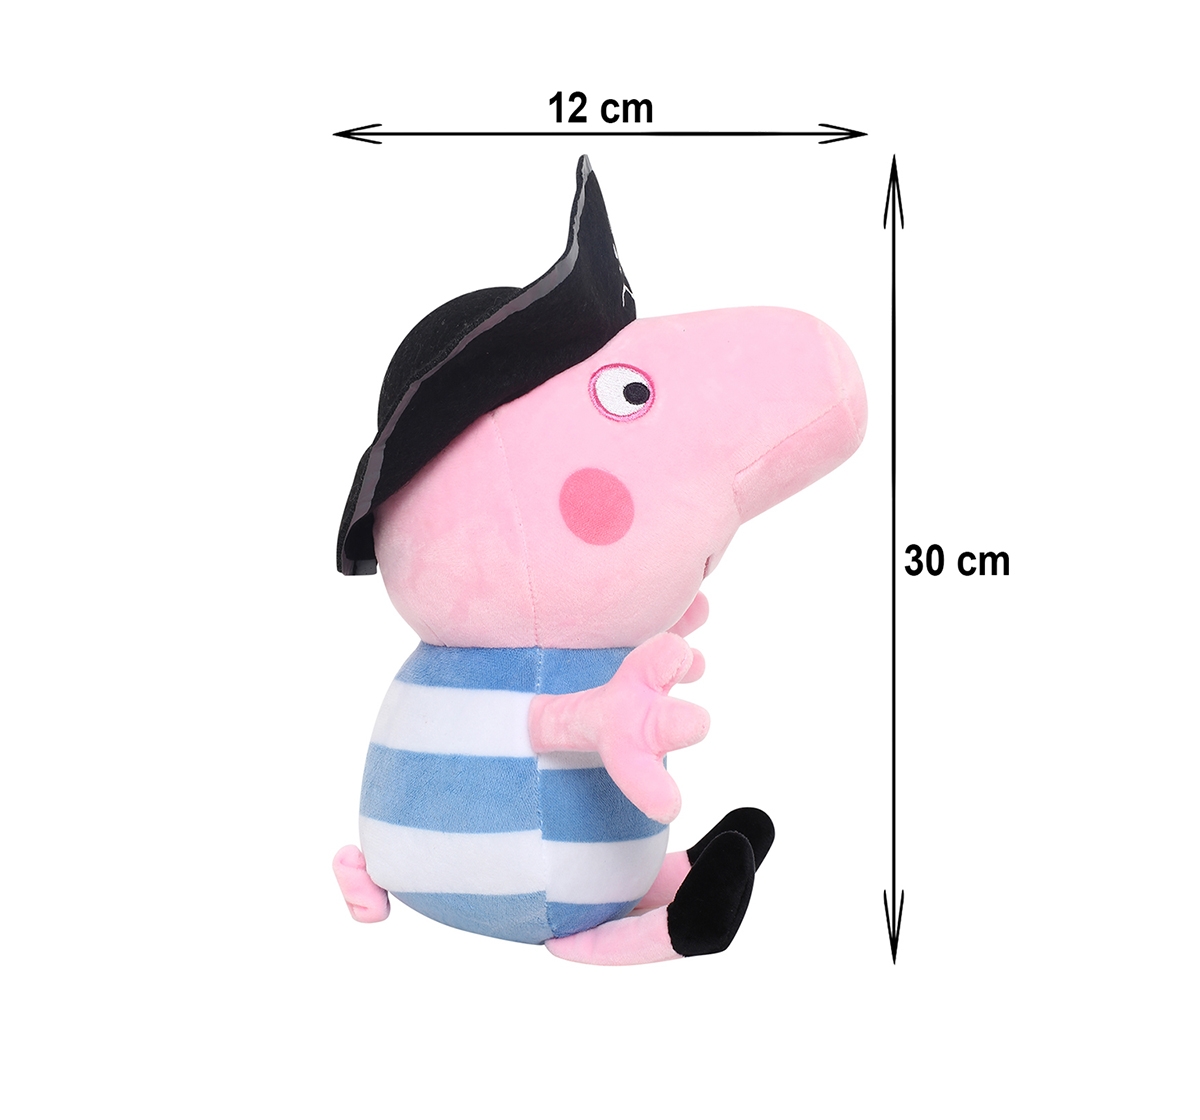 Peppa Pig | Peppa Pig In Pirate Costume Multi Color 30 Cm Soft Toy for Kids age 3Y+ - 30 Cm 7